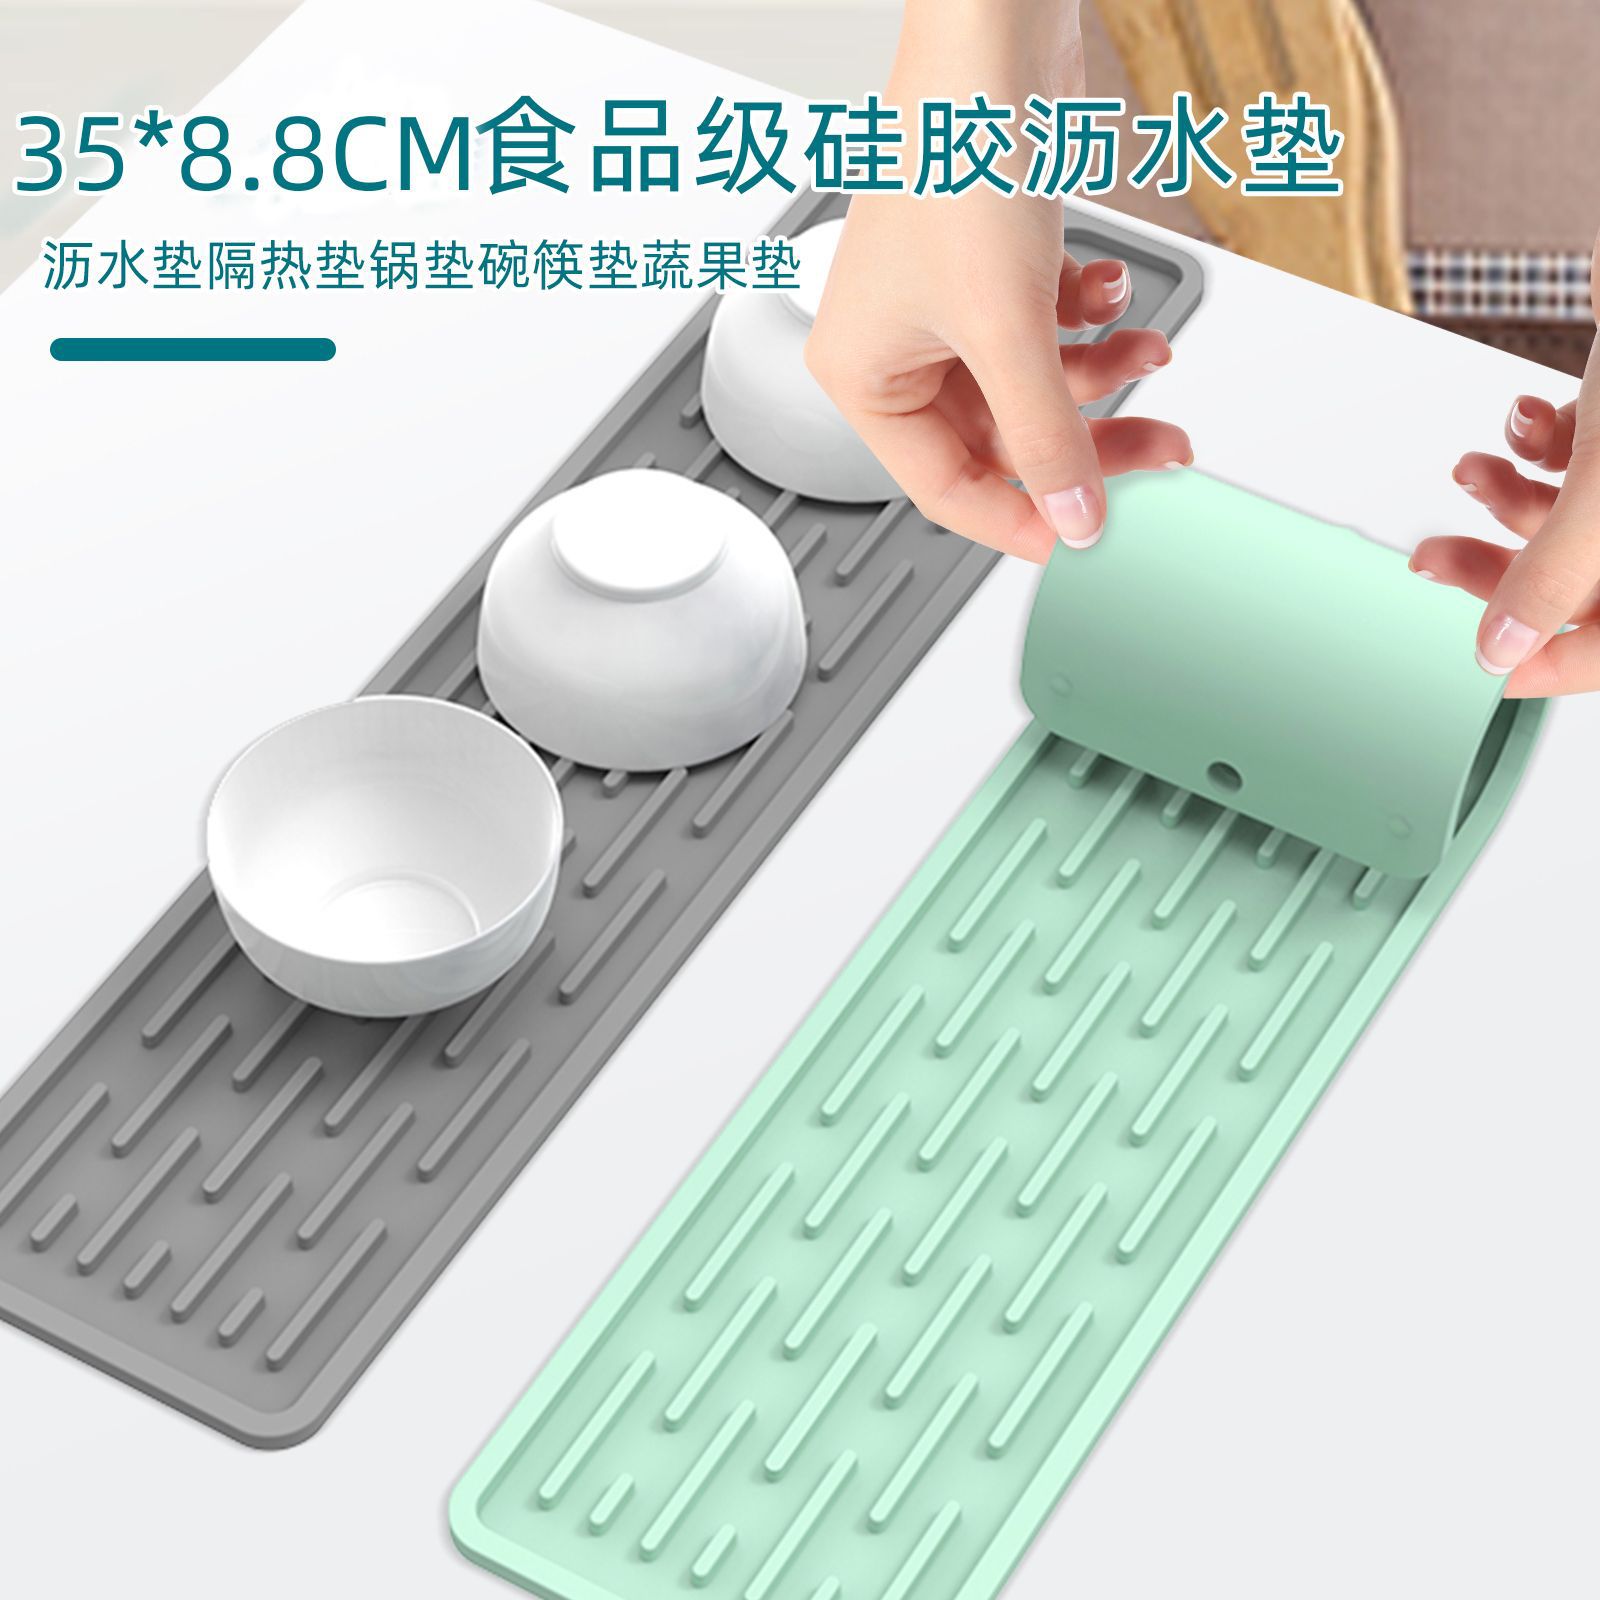 New Long 35 * 8cm Silicone Thermal Insulation Pad Kitchen Table Non-Slip Cutting Board Fixed Cushion Kitchen Pot Mat Bowl Mat